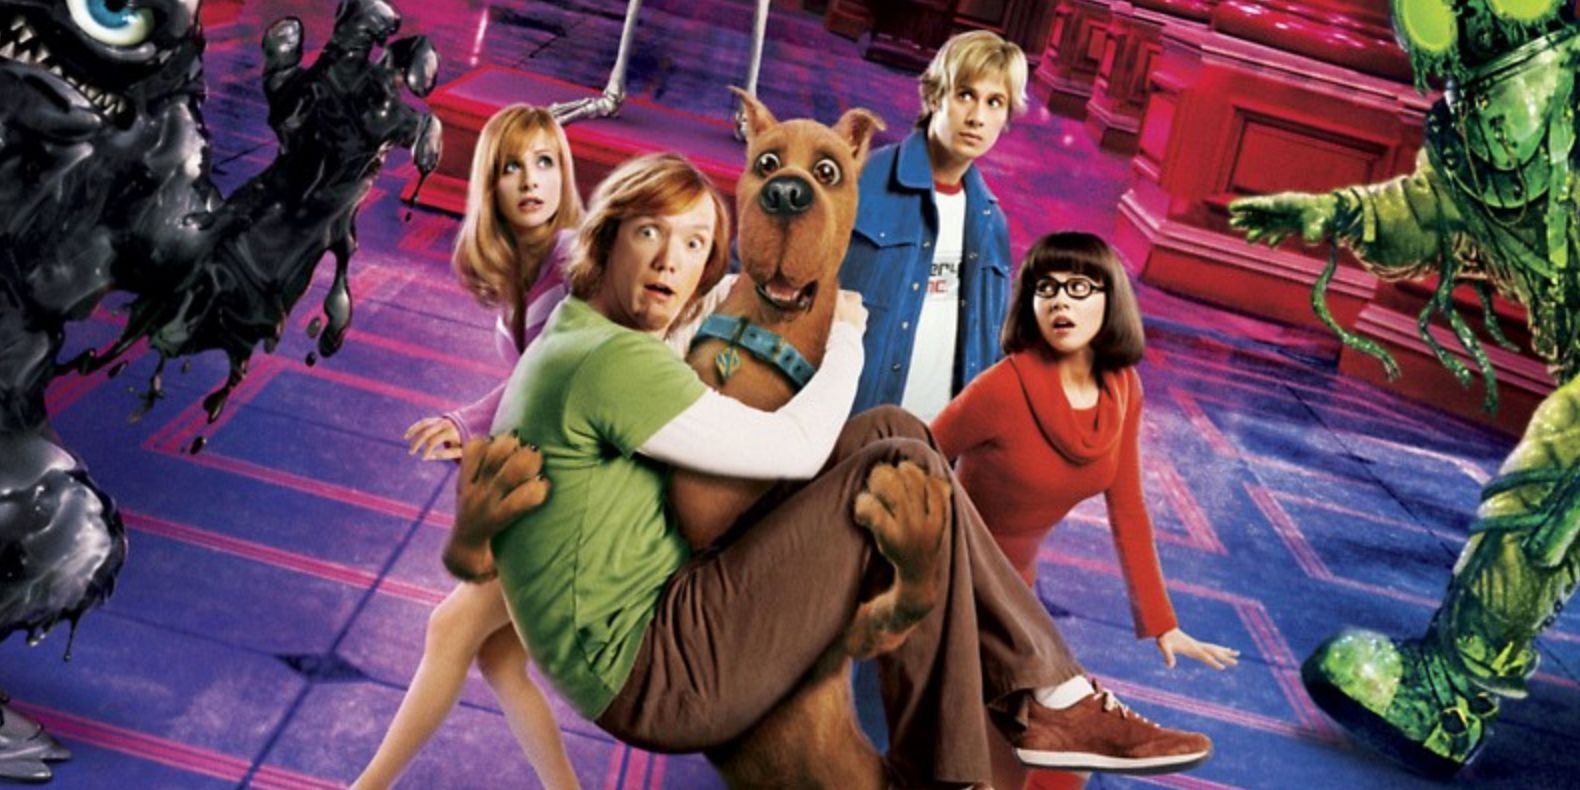 Scooby carries Shaggy in front of the rest of Mystery Inc in Scooby Doo Monsters Unleashed